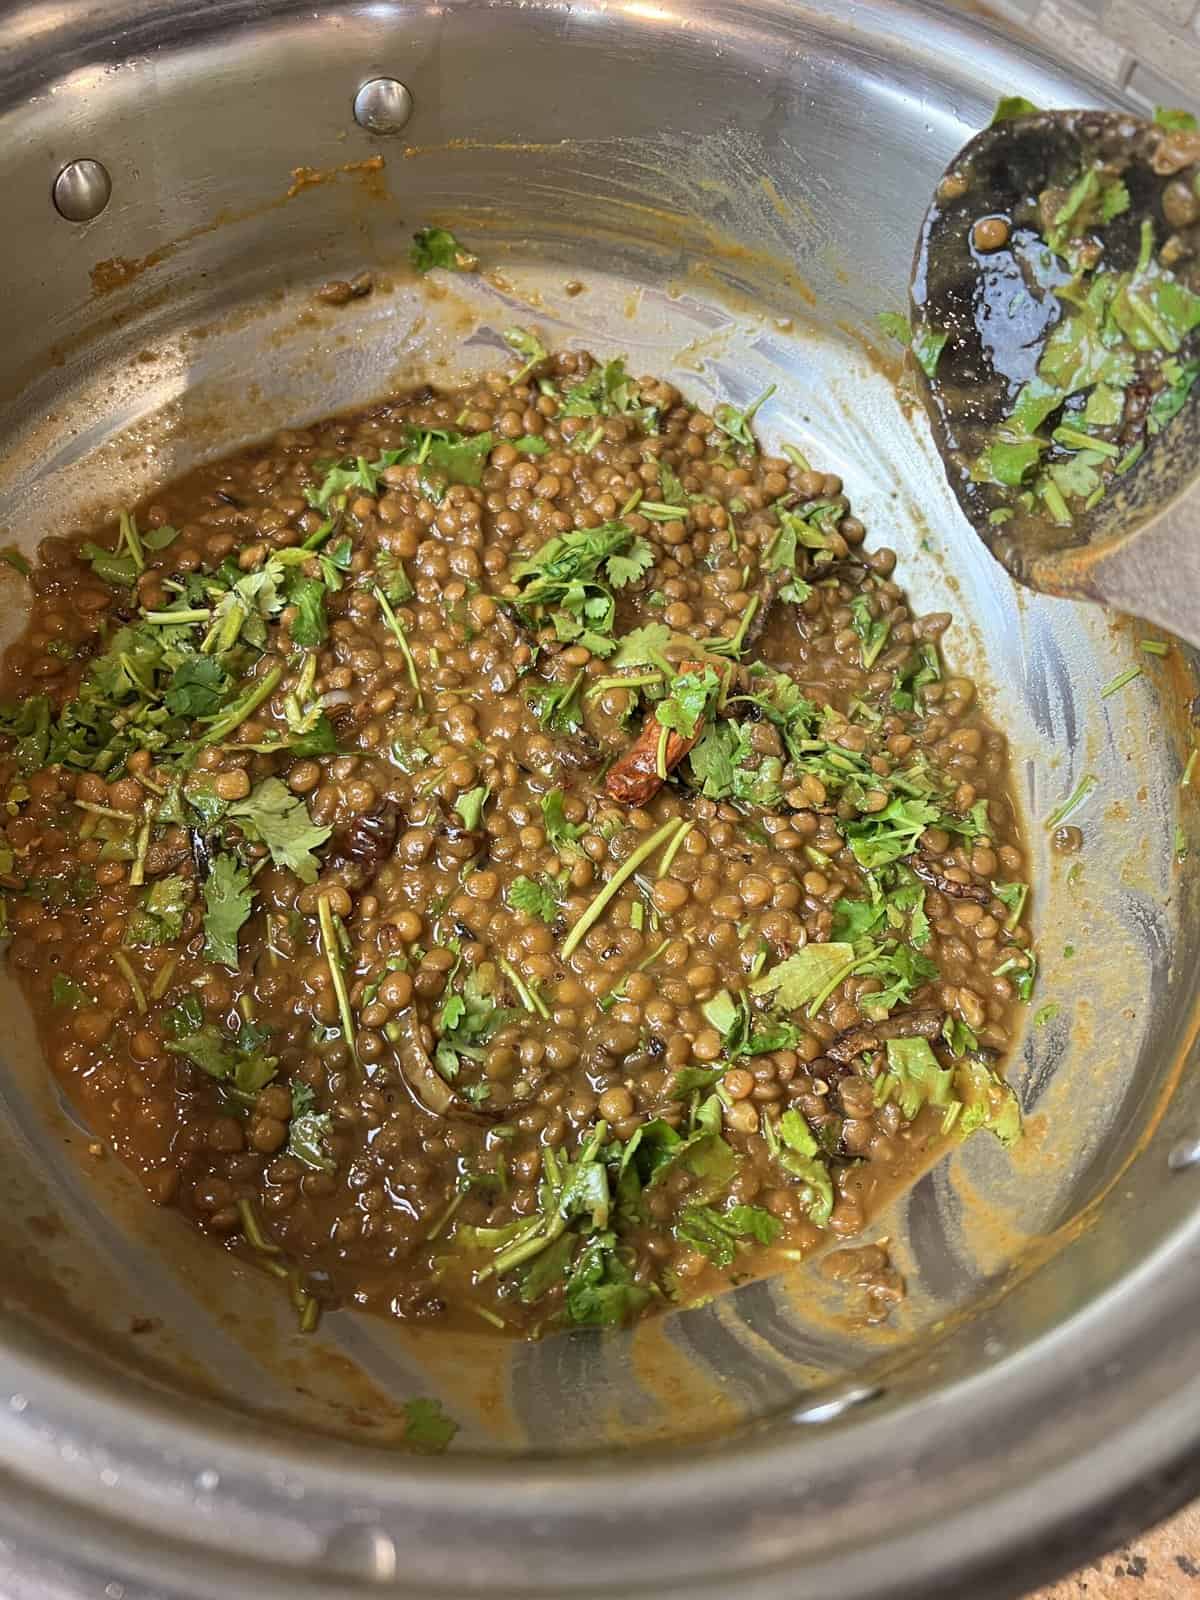 Cooked brown lentils in a stainless steel pot topped with the tadka and chopped cilantro.